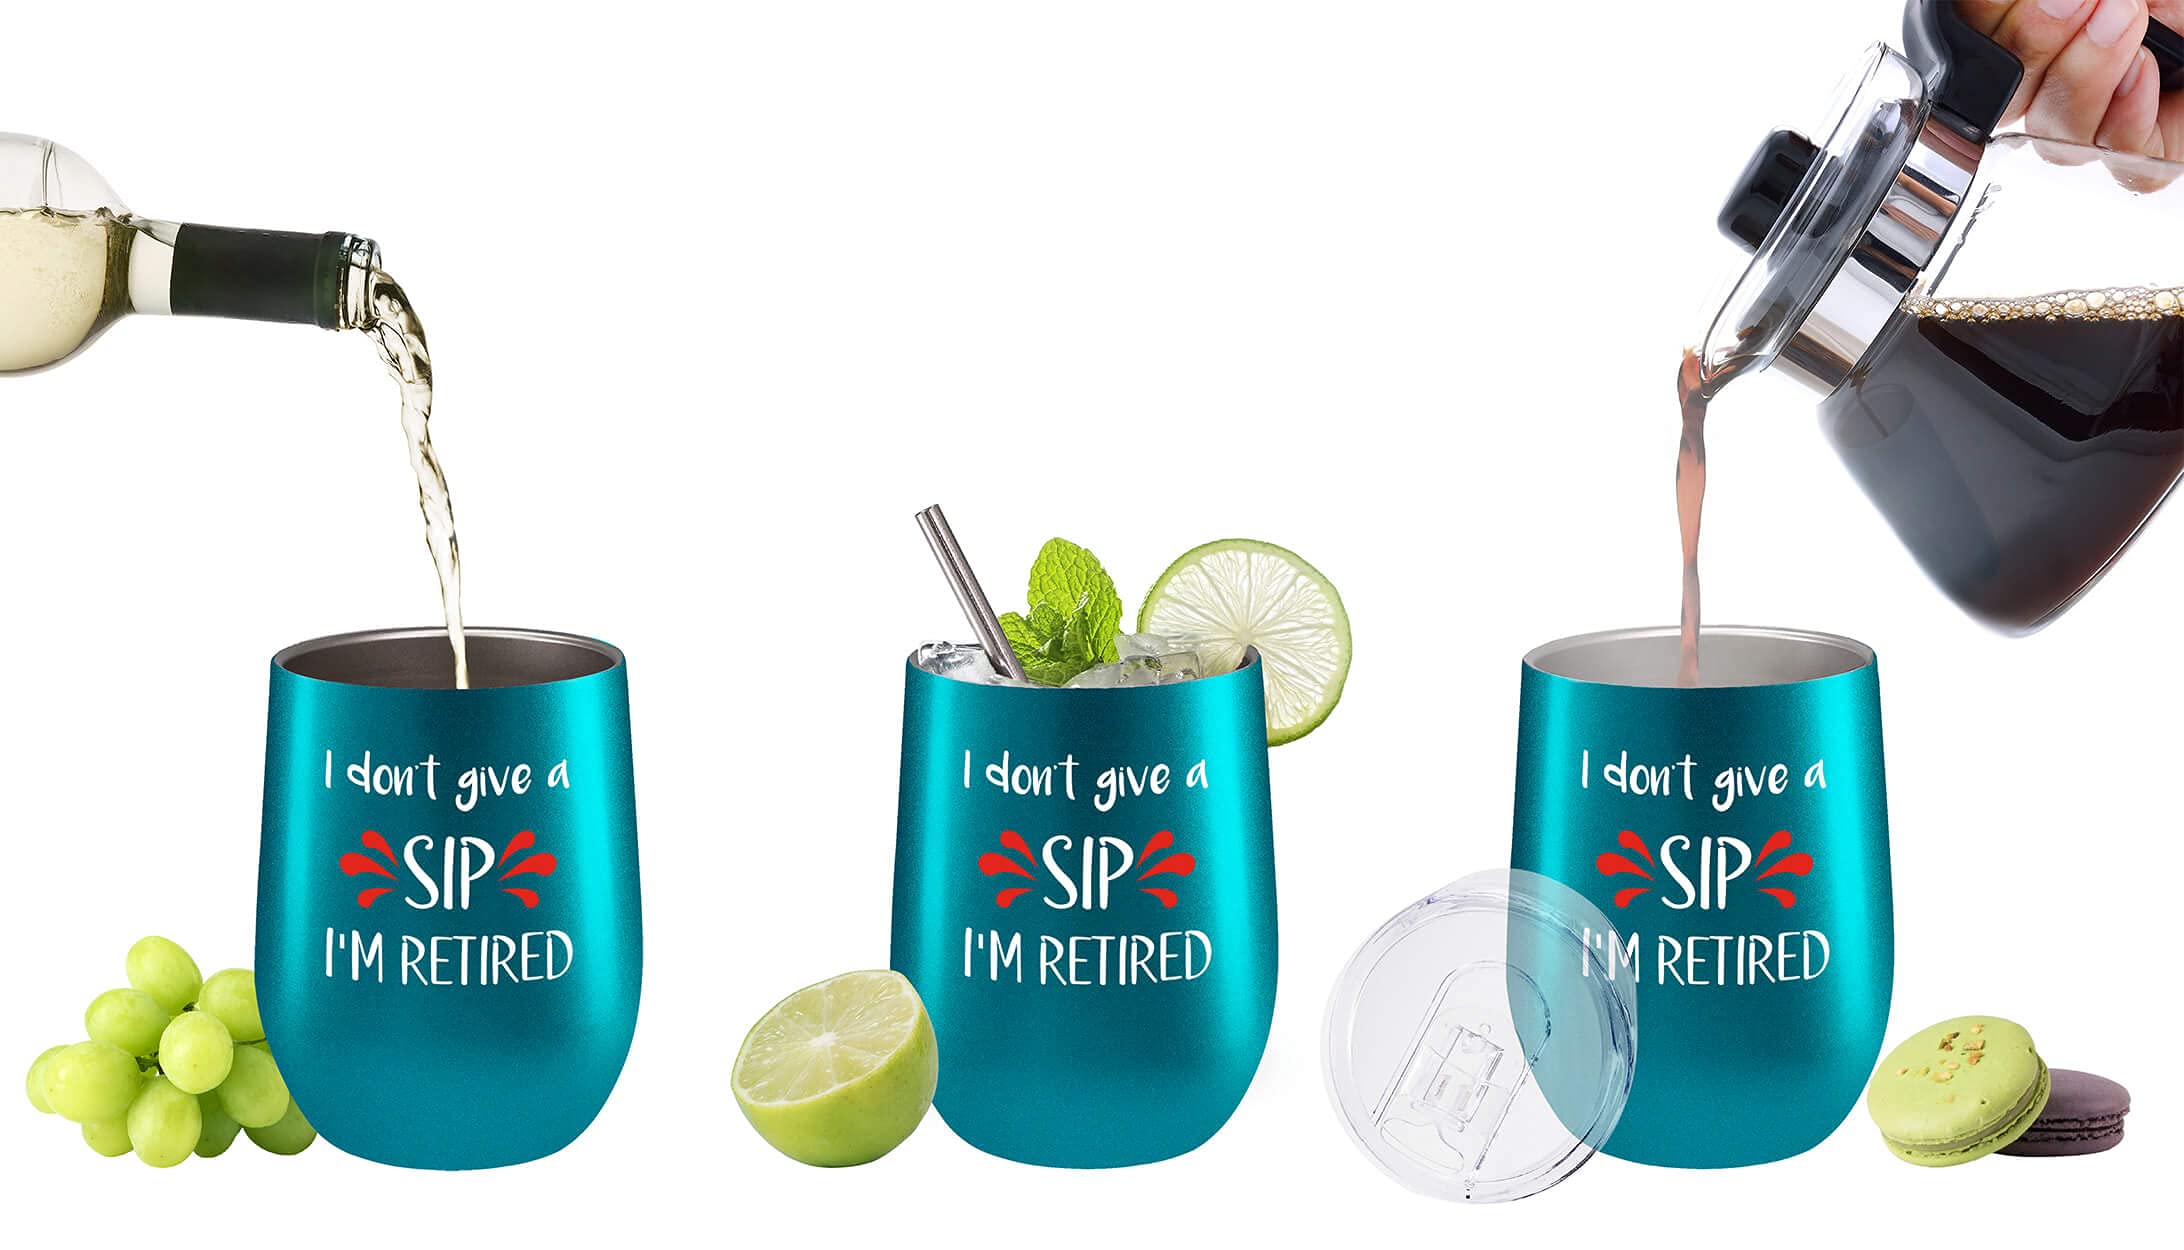 Fancyfams I Don’t Give a Sip I’m Retired, Retirement Gifts for Women - 12 oz Stainless Steel Wine Tumbler, Retirement Gifts, Retired Gifts for Women, Retirement Gift (Give a Sip - Turquoise)